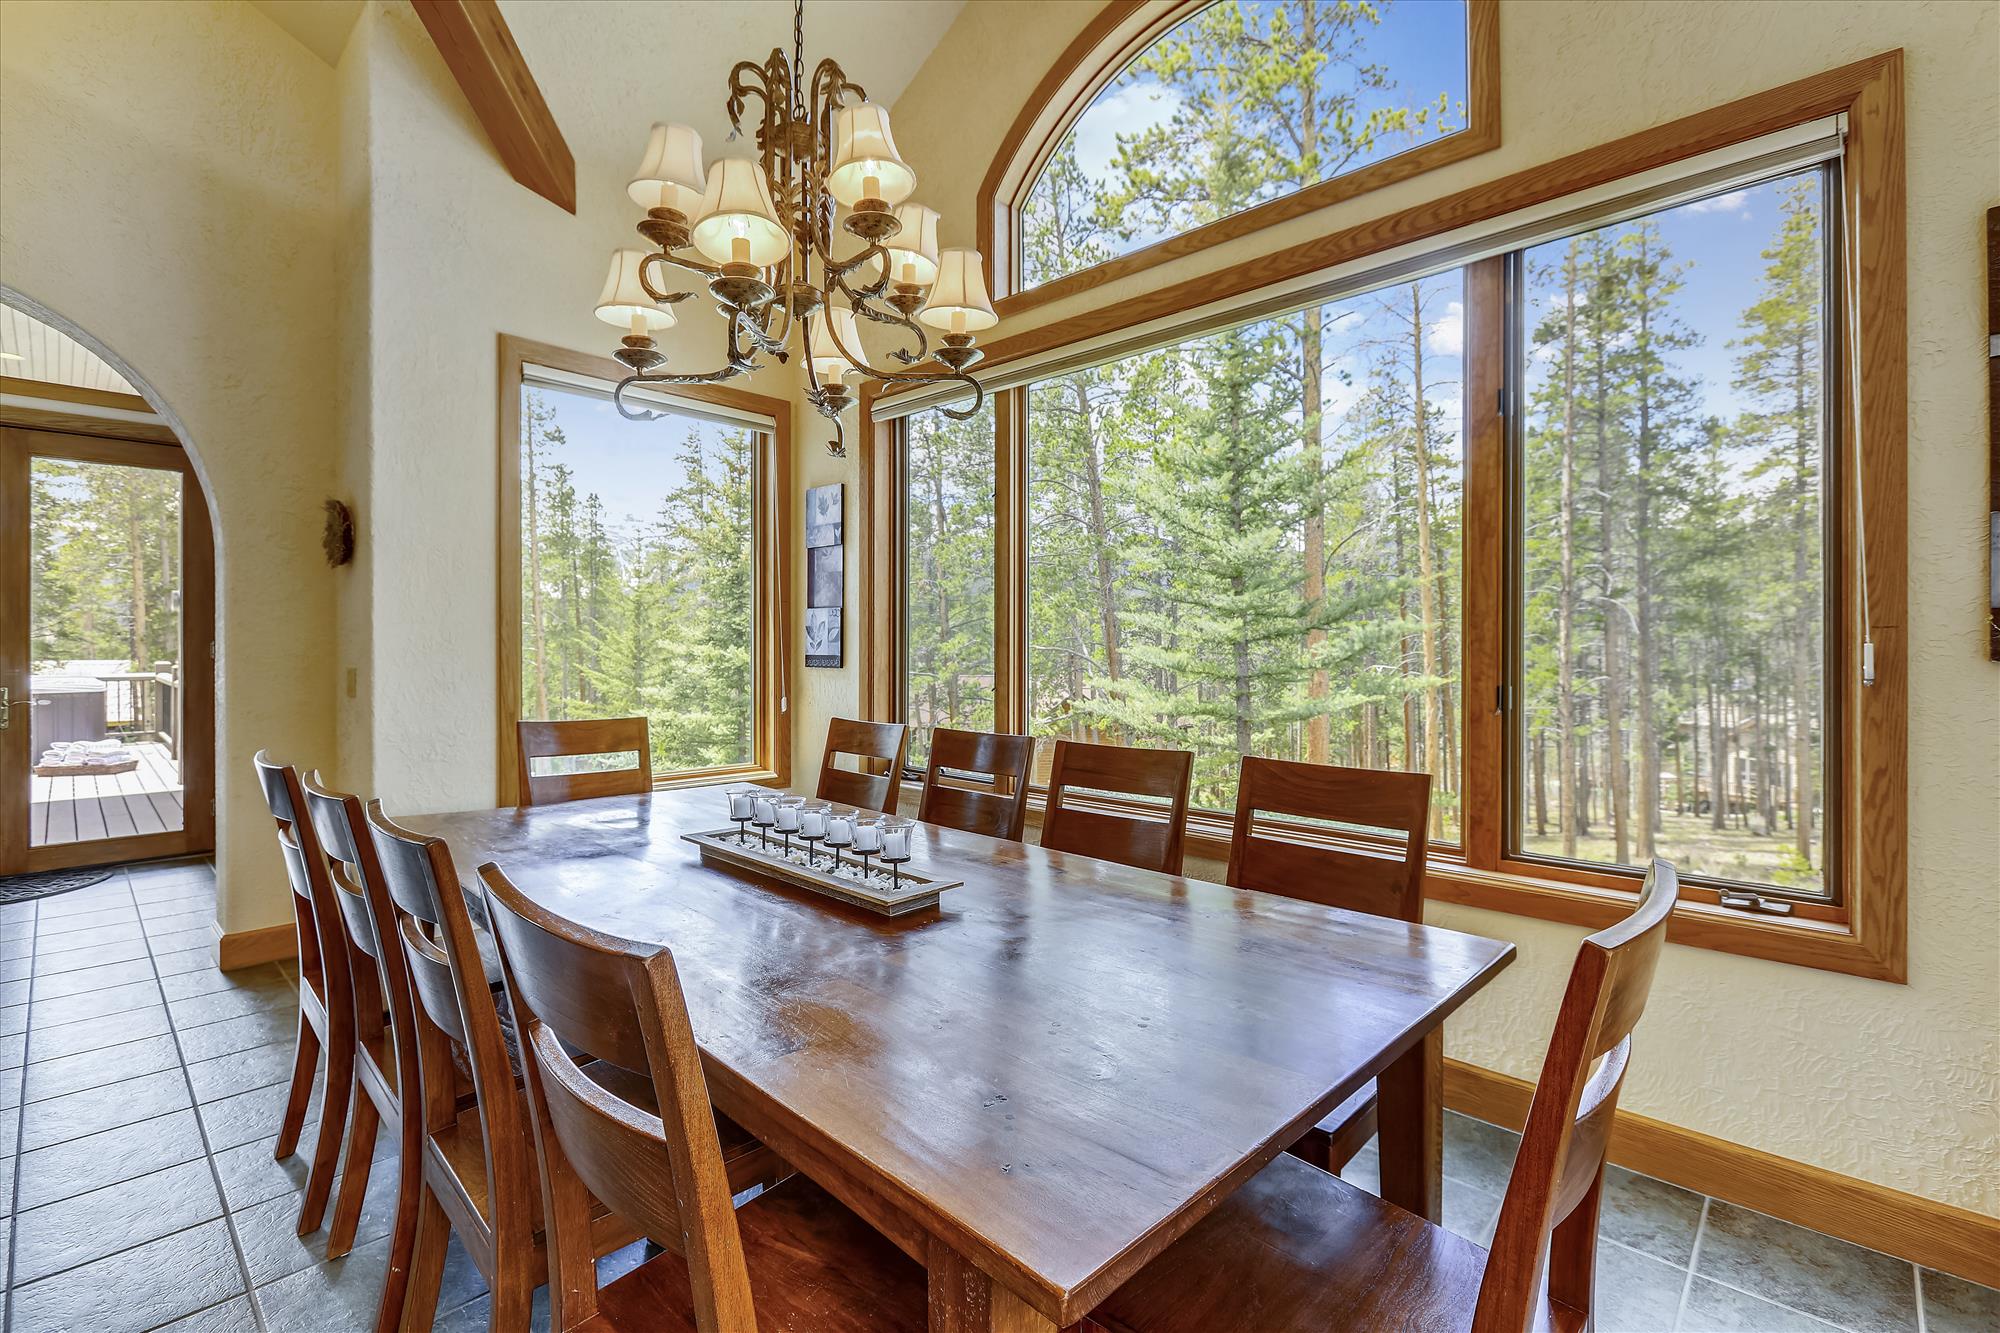 Additional view of the dining room with 10 spaces - Evergreen Lodge Breckenridge Vacation Rental